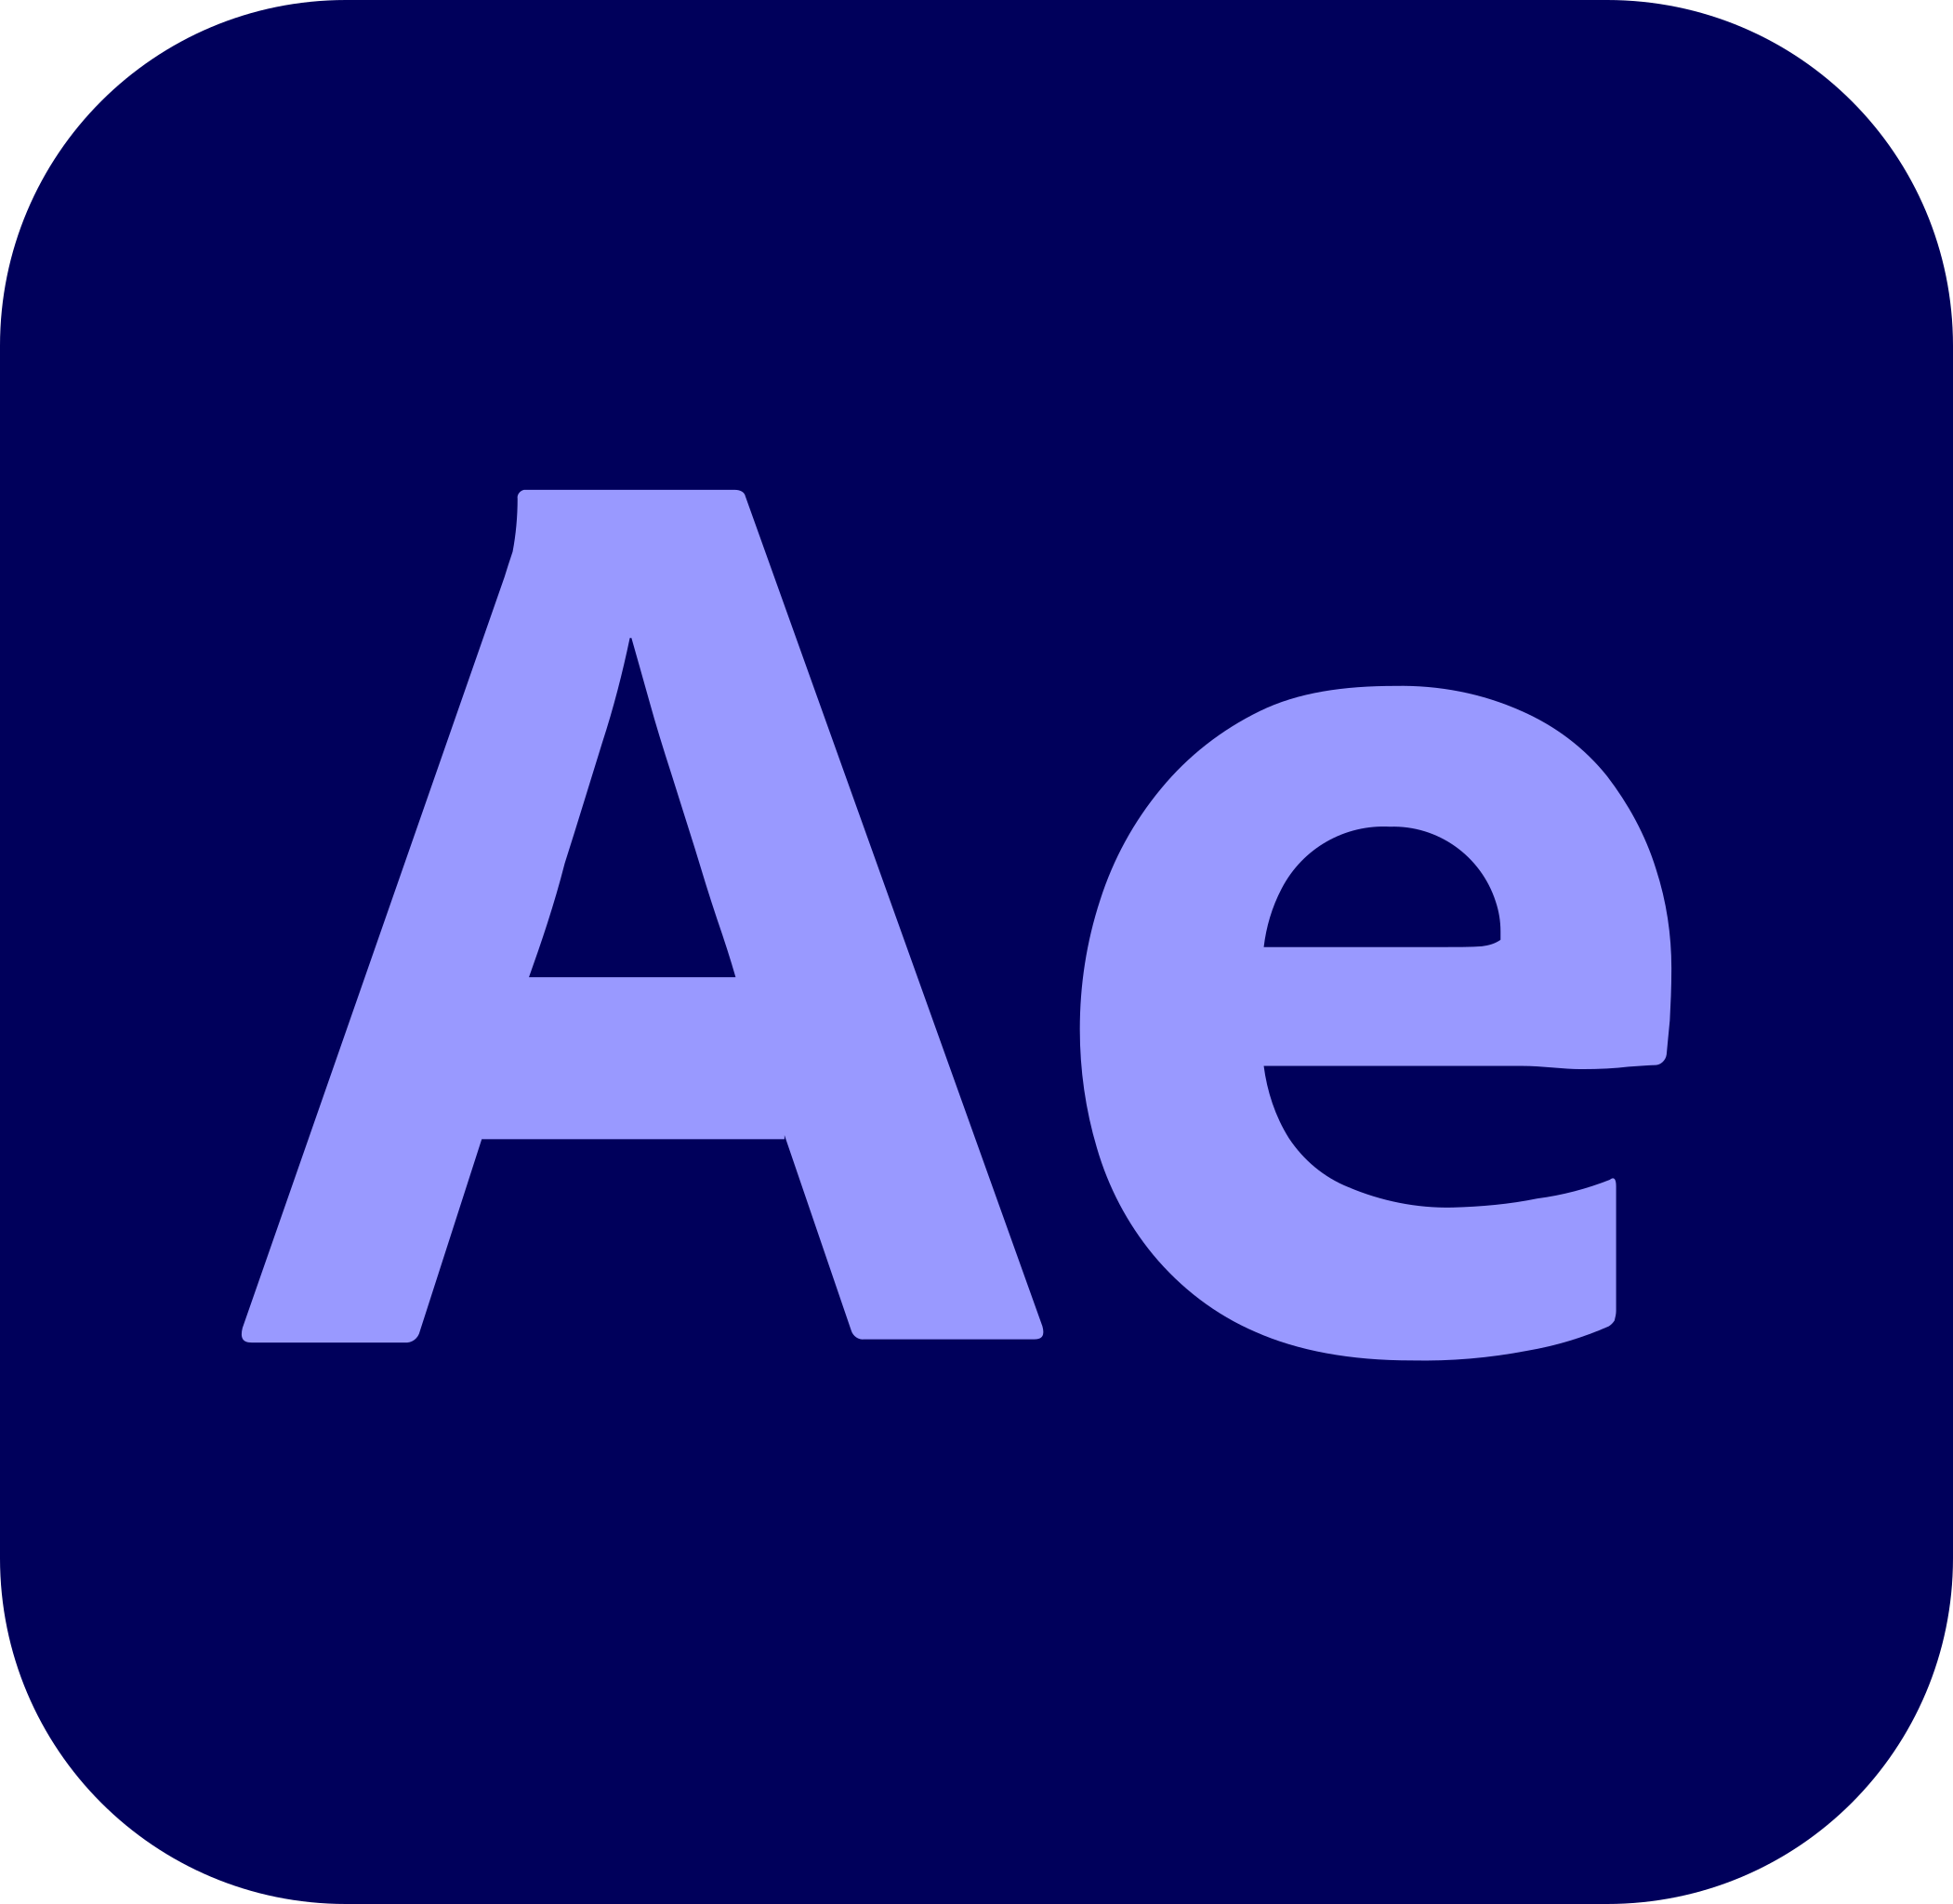 Adobe after effects cc icon.svg